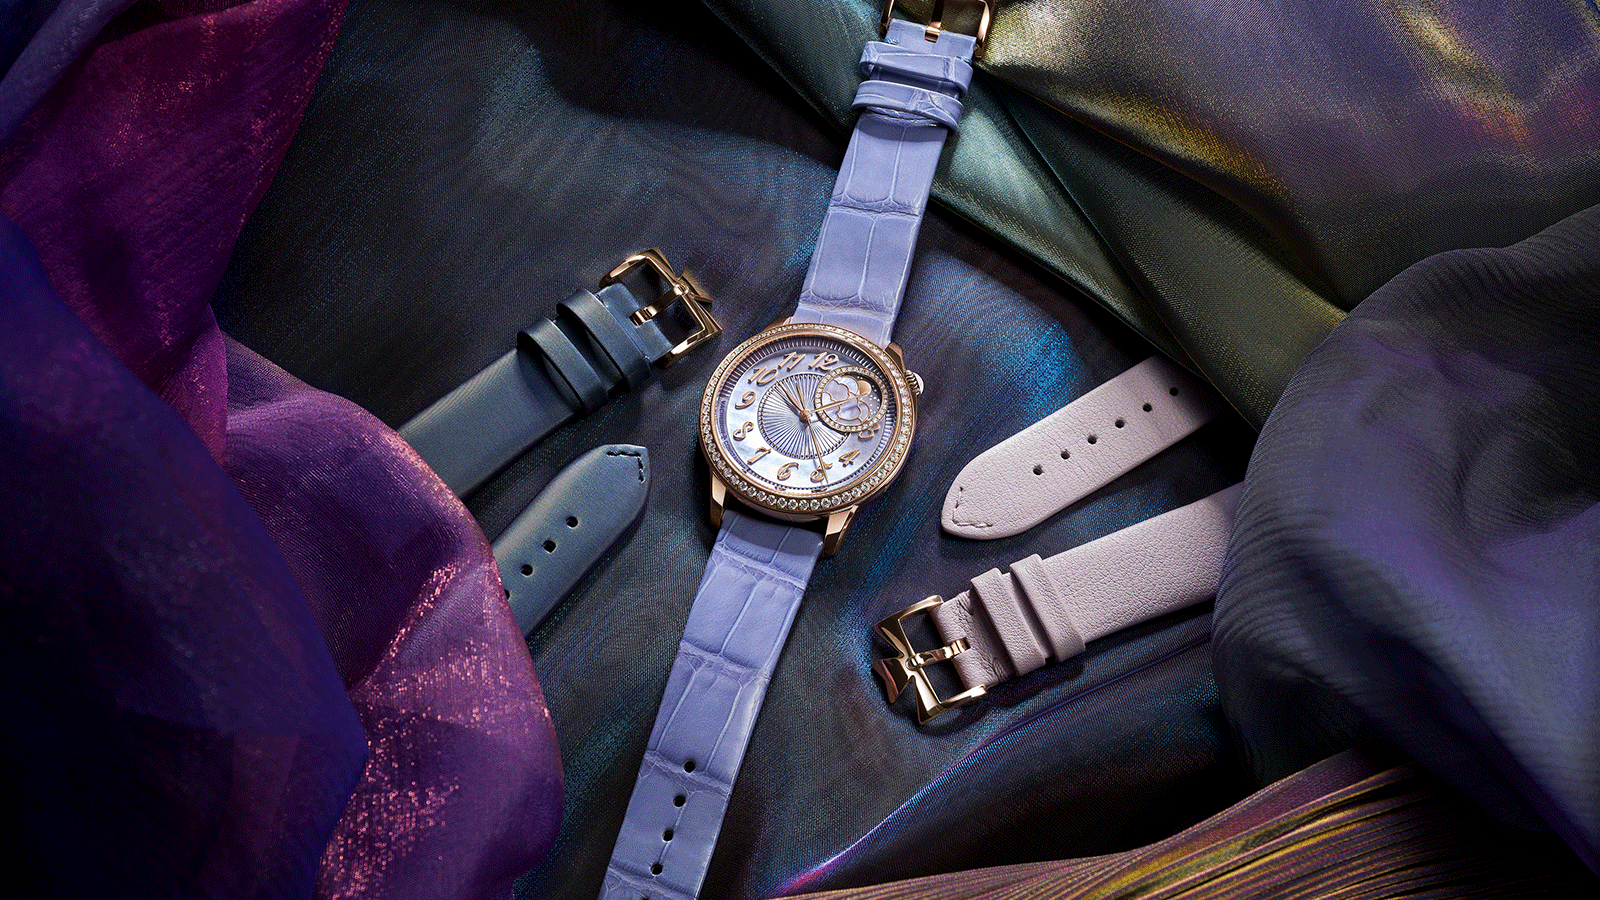 Inspired by the refinement of Haute Couture and Vacheron Constantin's aesthetic heritage, the Égérie collection welcomes a moon phase watch issued in a 100-piece limited series developed with designer Yiqing Yin. 